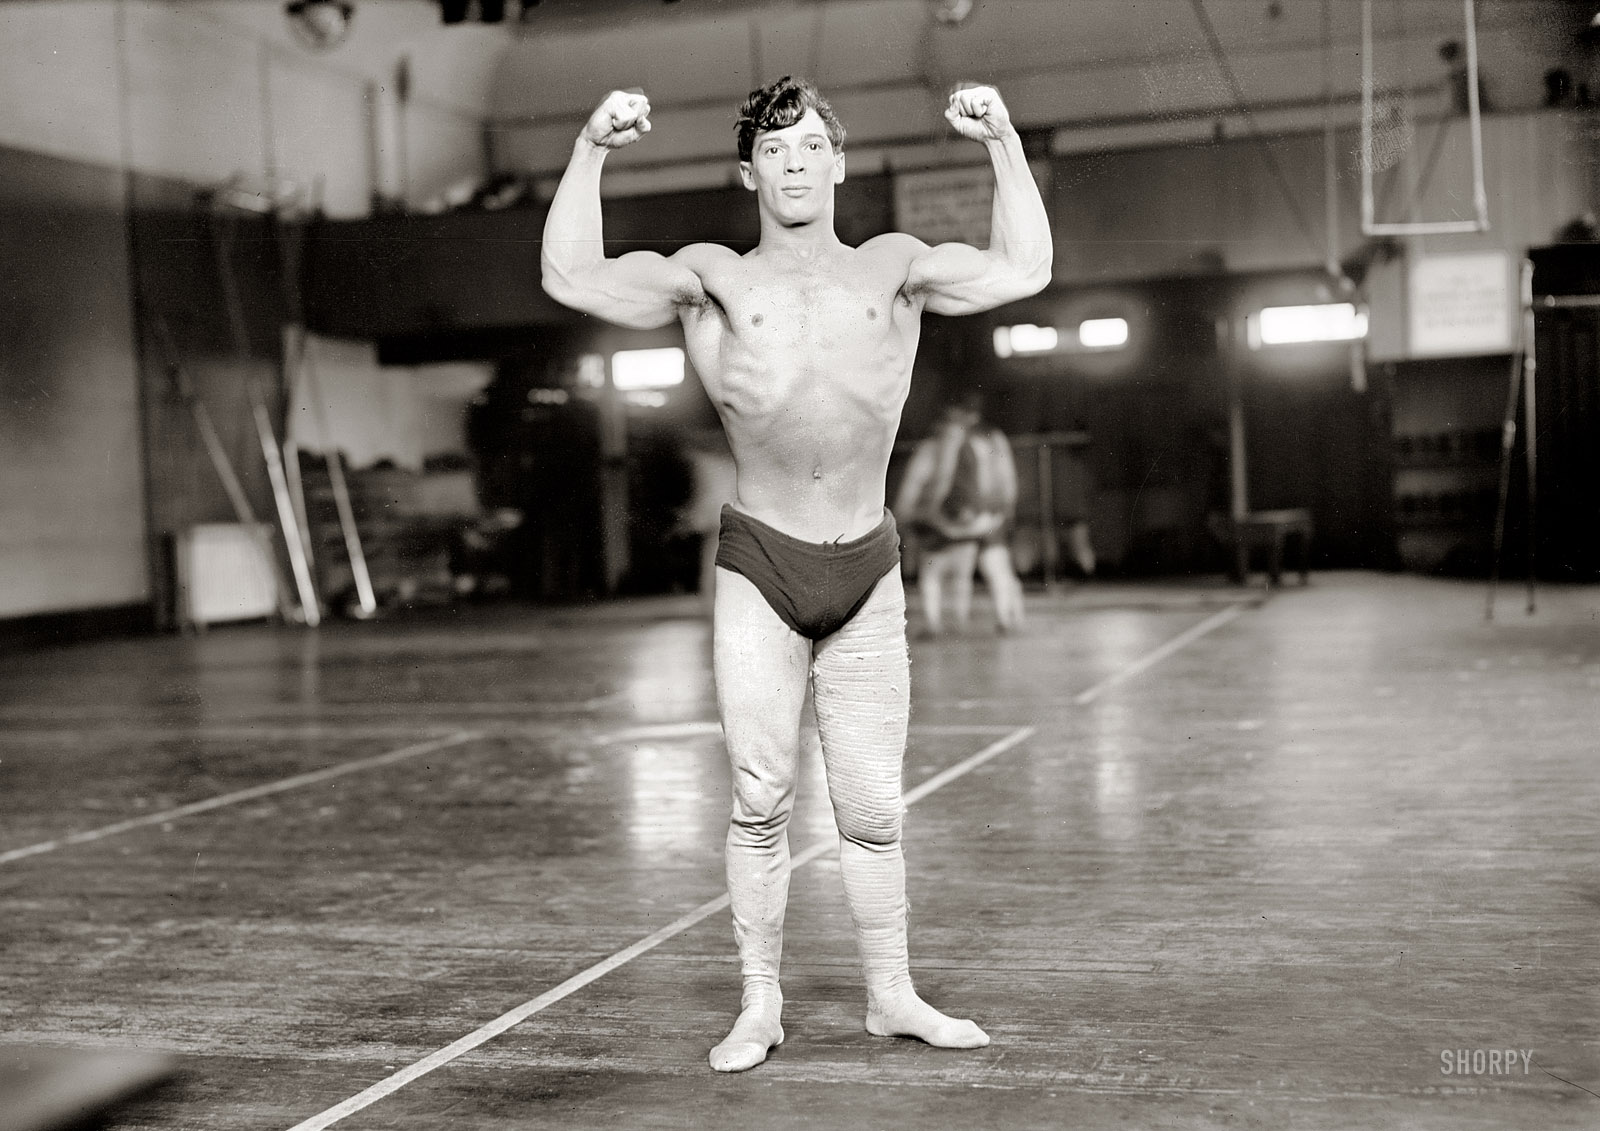 New York City circa 1908. "Sam Kramer." The bodybuilder and wrestler whose flipside we saw a week ago. George Grantham Bain Collection. View full size.